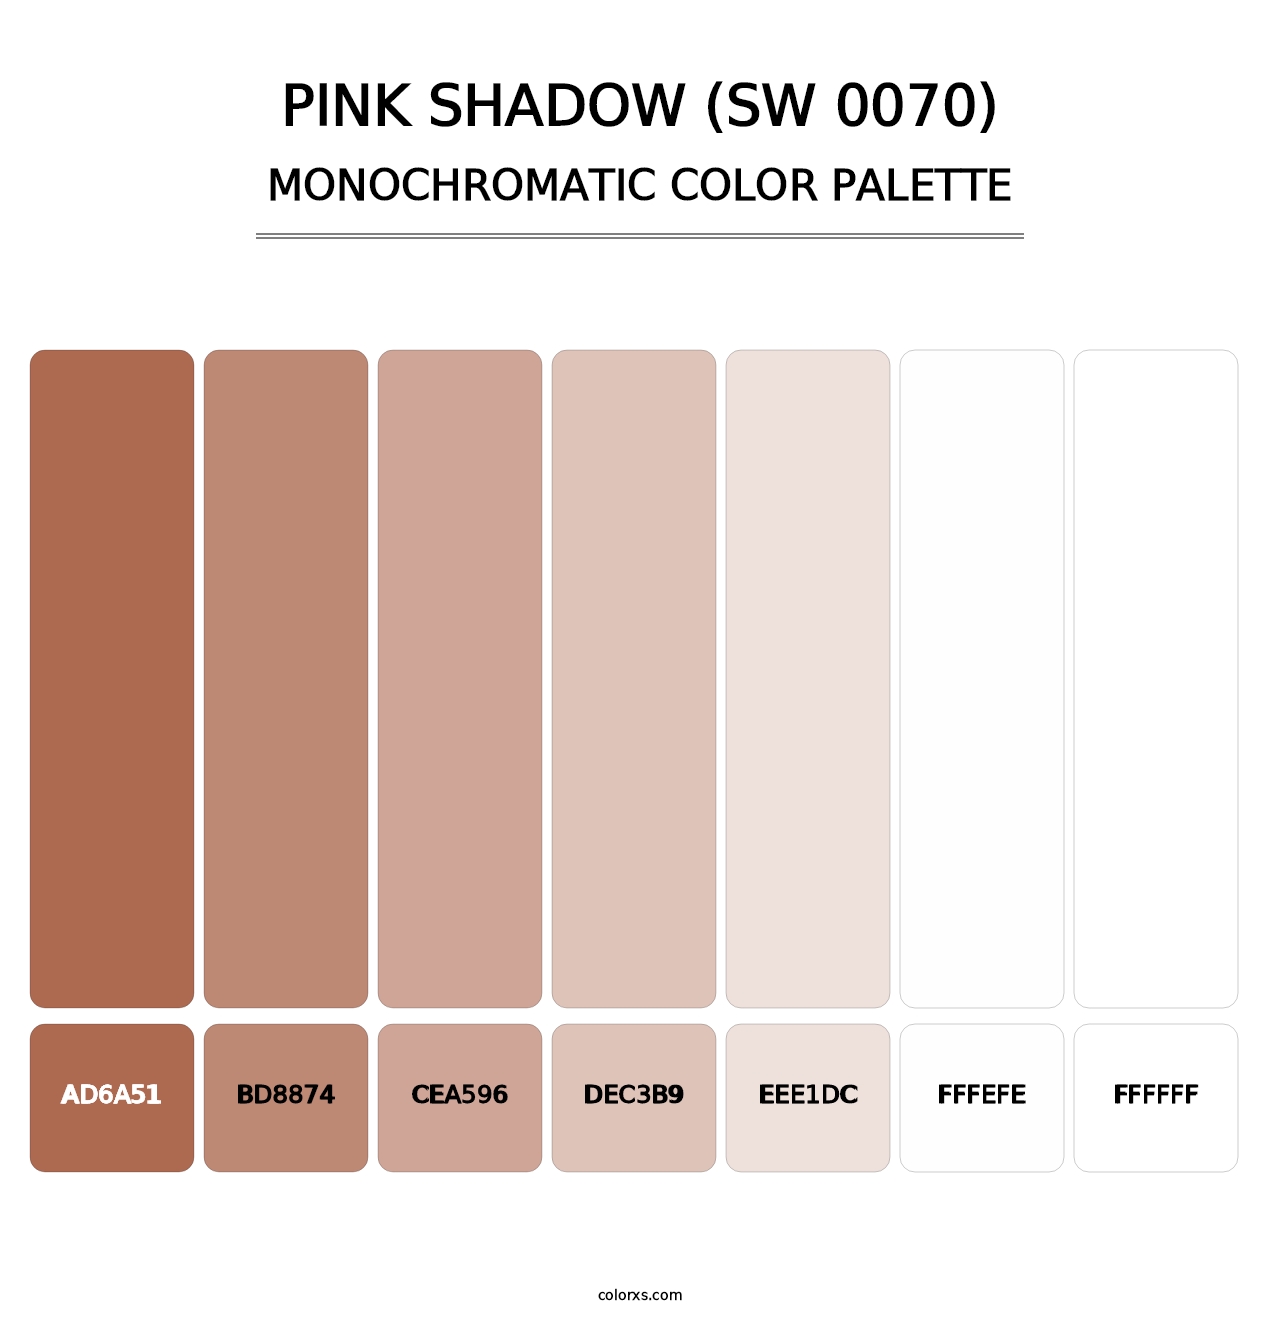 Pink Shadow (SW 0070) - Monochromatic Color Palette